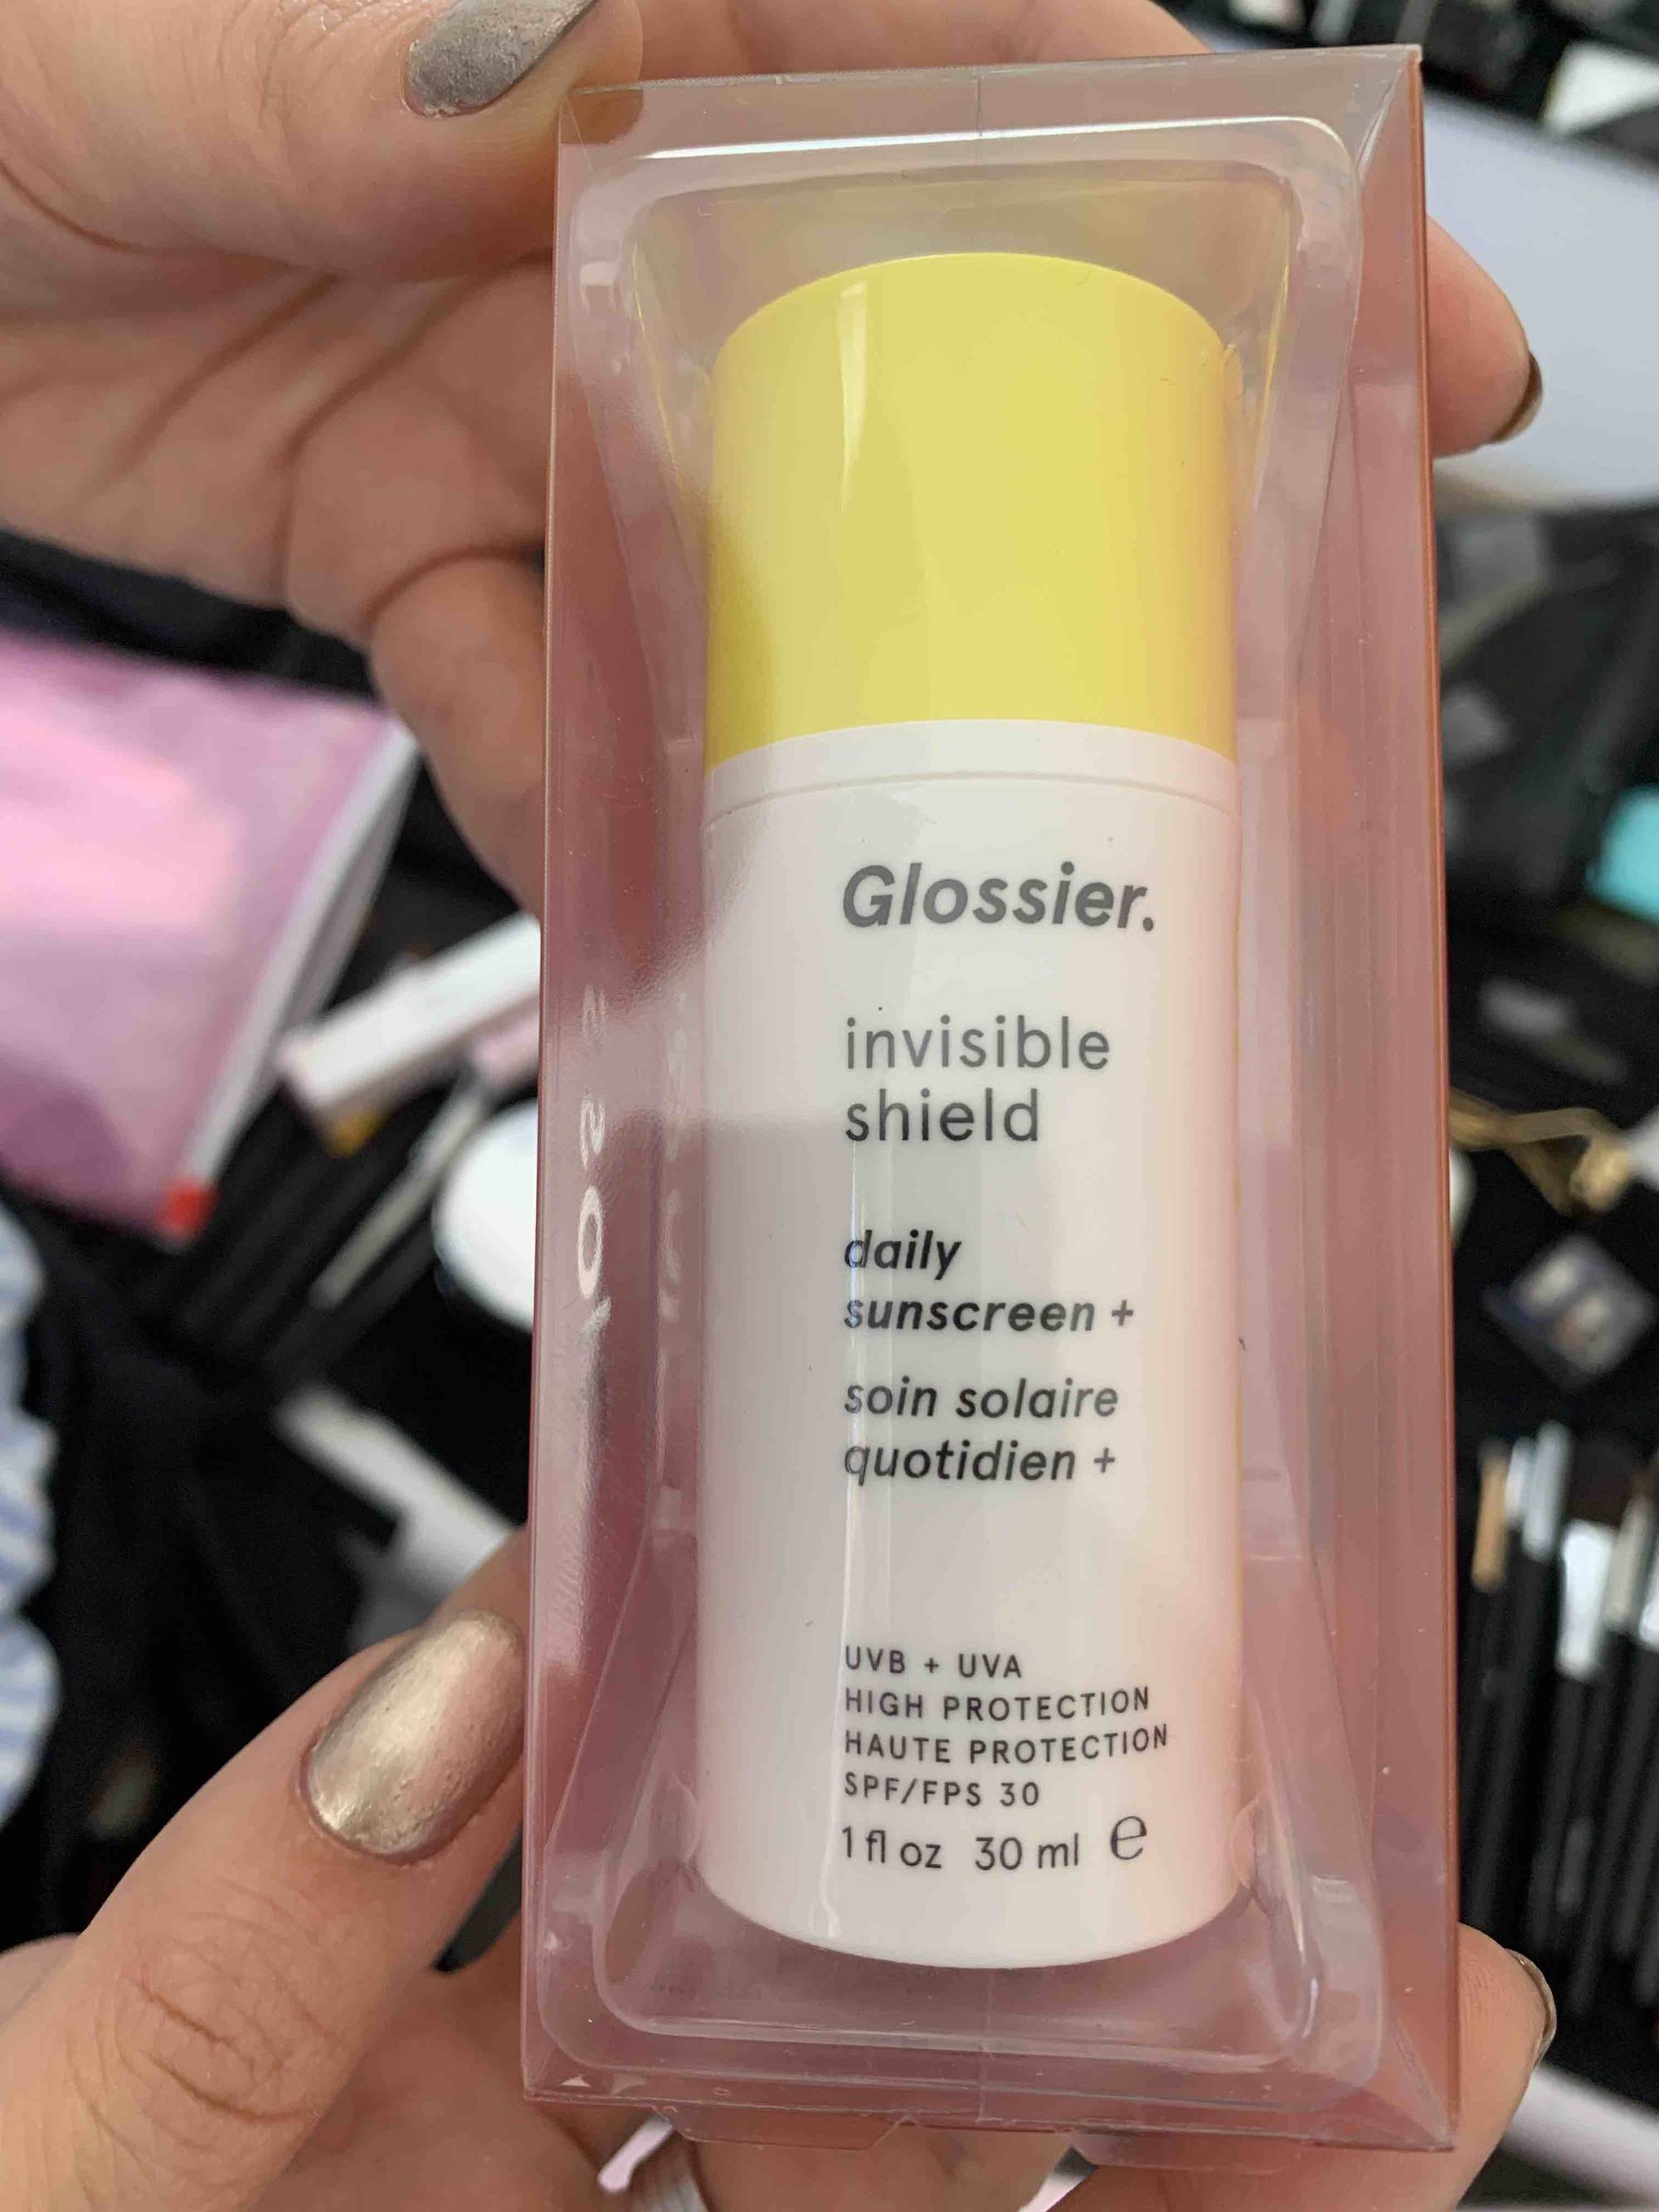 GLOSSIER - Invisible shield - Soin solaire quotidien FPS 30